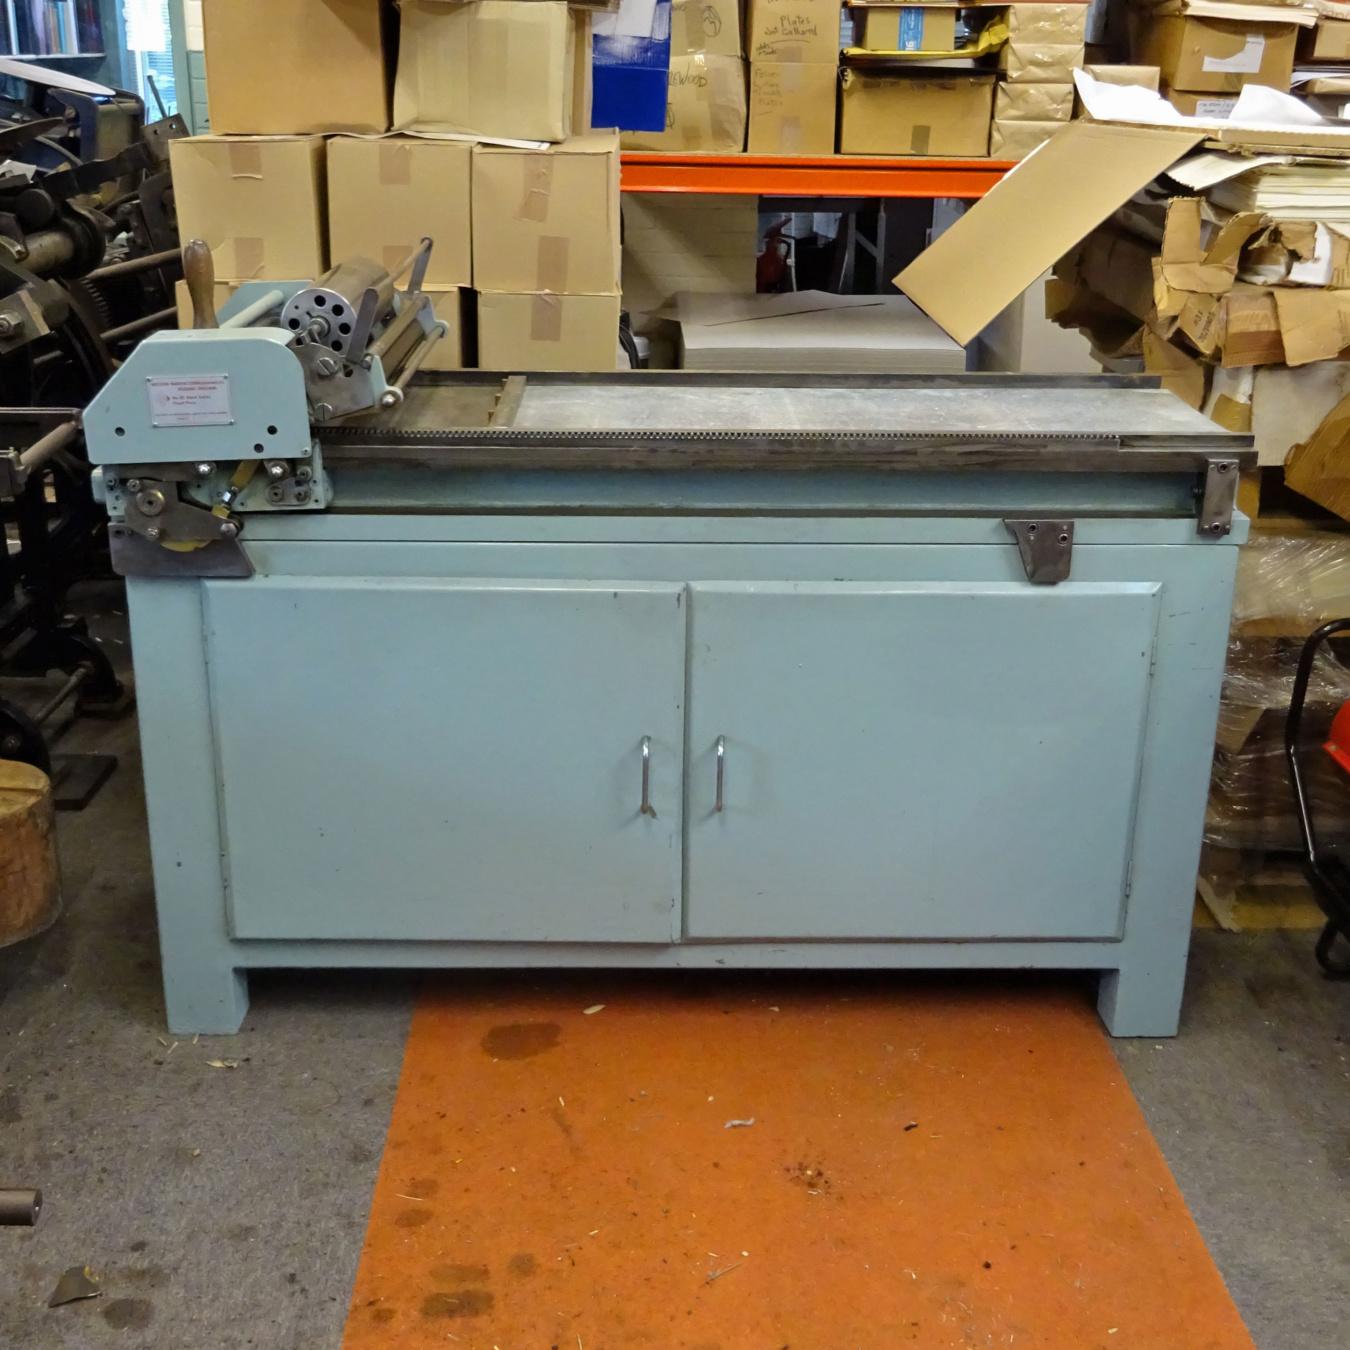 Western Number 5 hand galley proofing press for sale